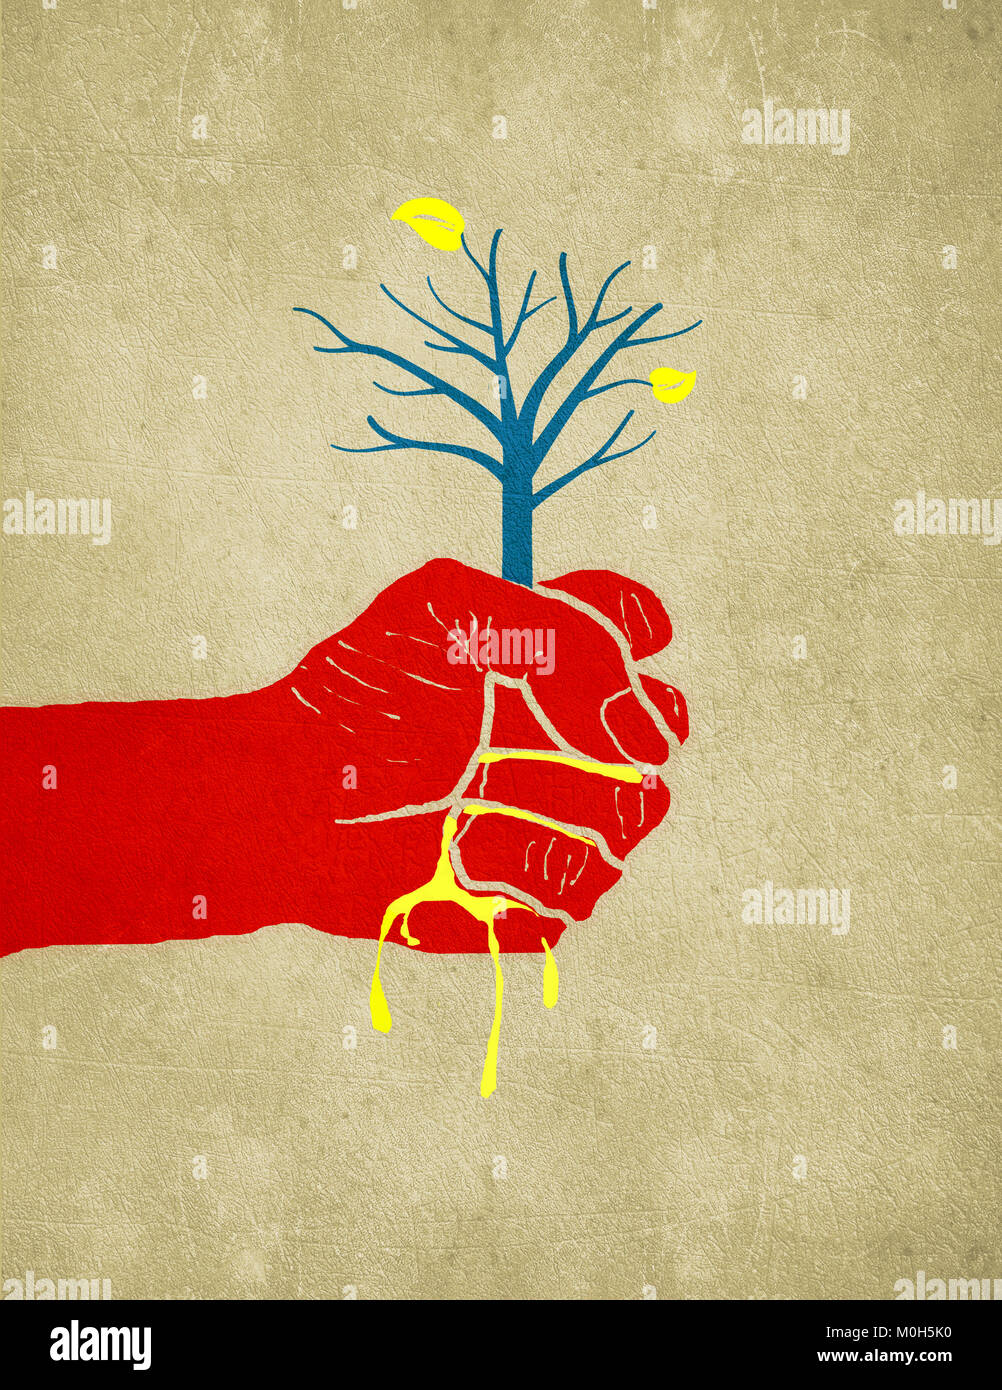 hand sqeeze out a tree digital illustration Stock Photo